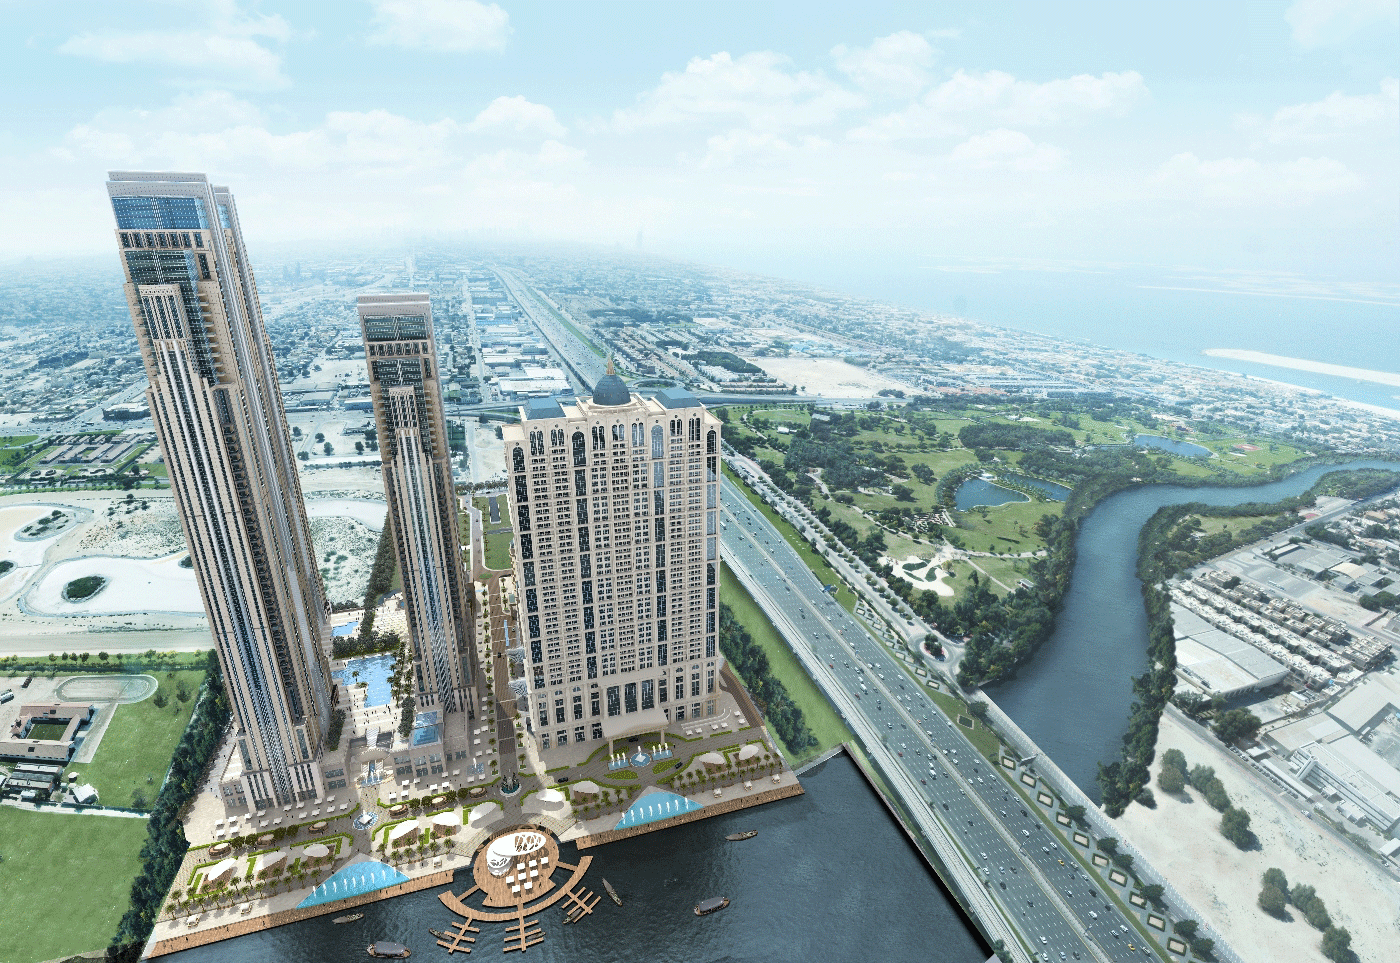 An artist's impression of the proposed Al Habtoor City in Dubai.